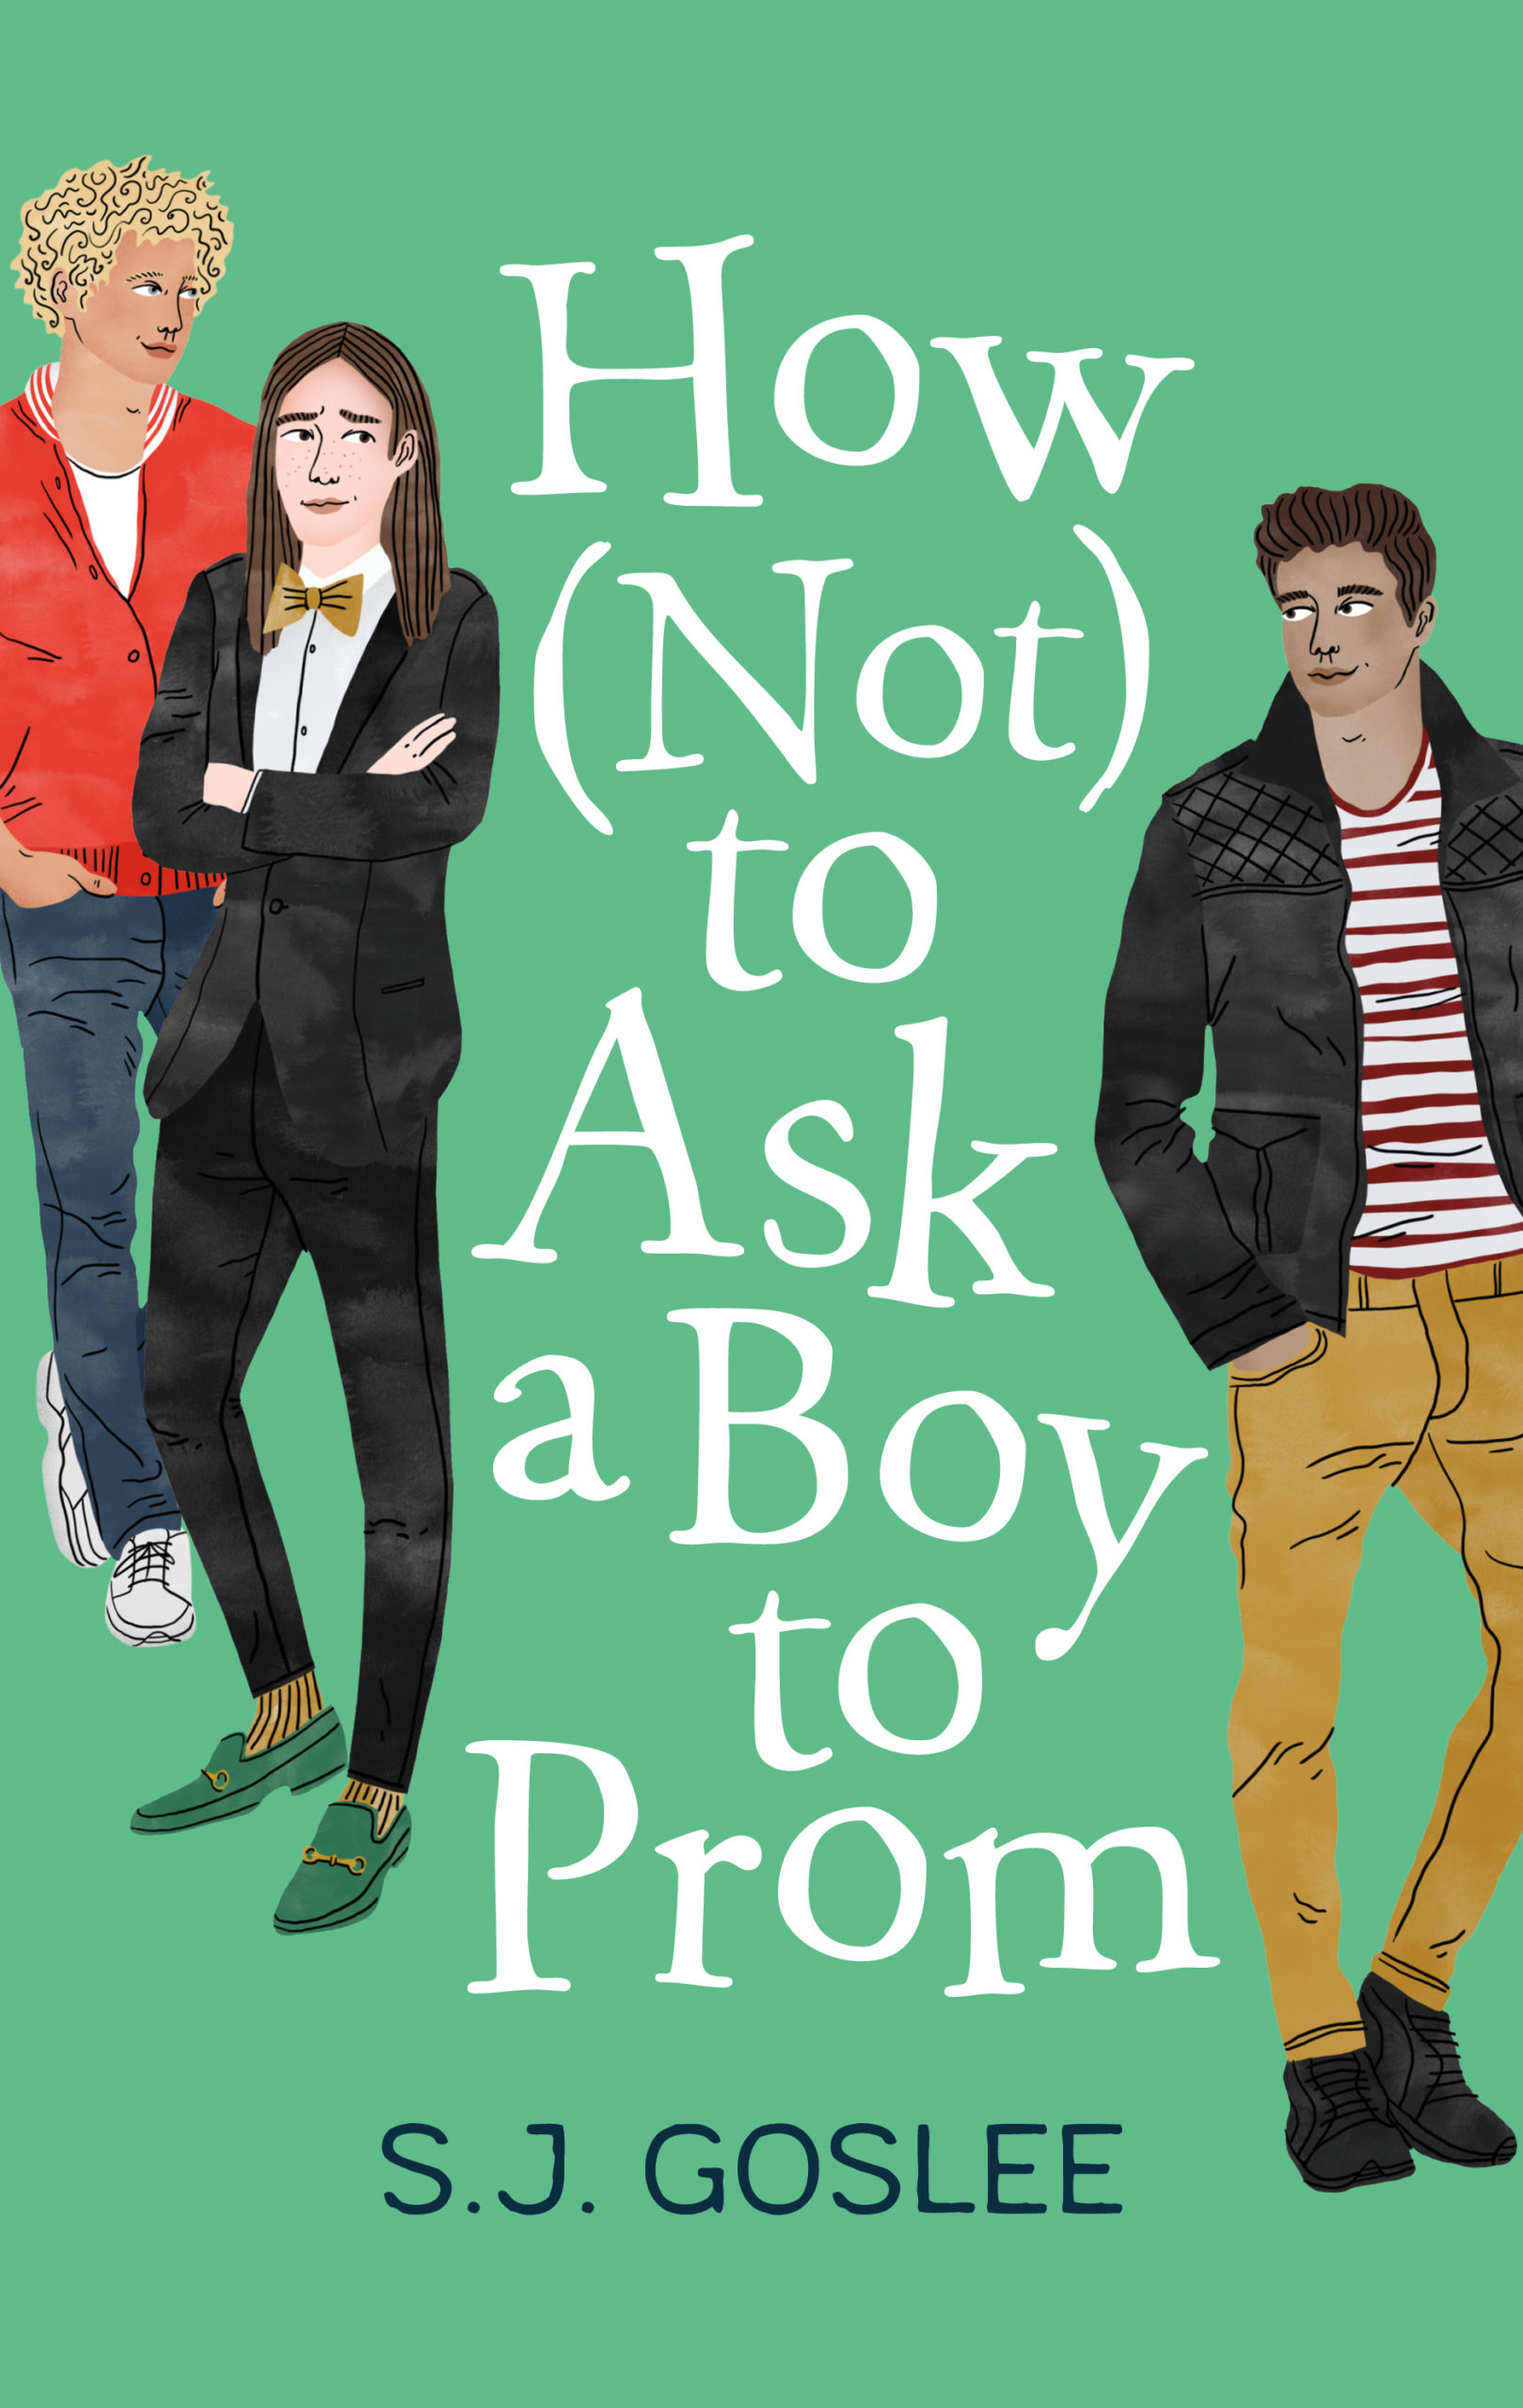 Book How Not to Ask a Boy to Prom